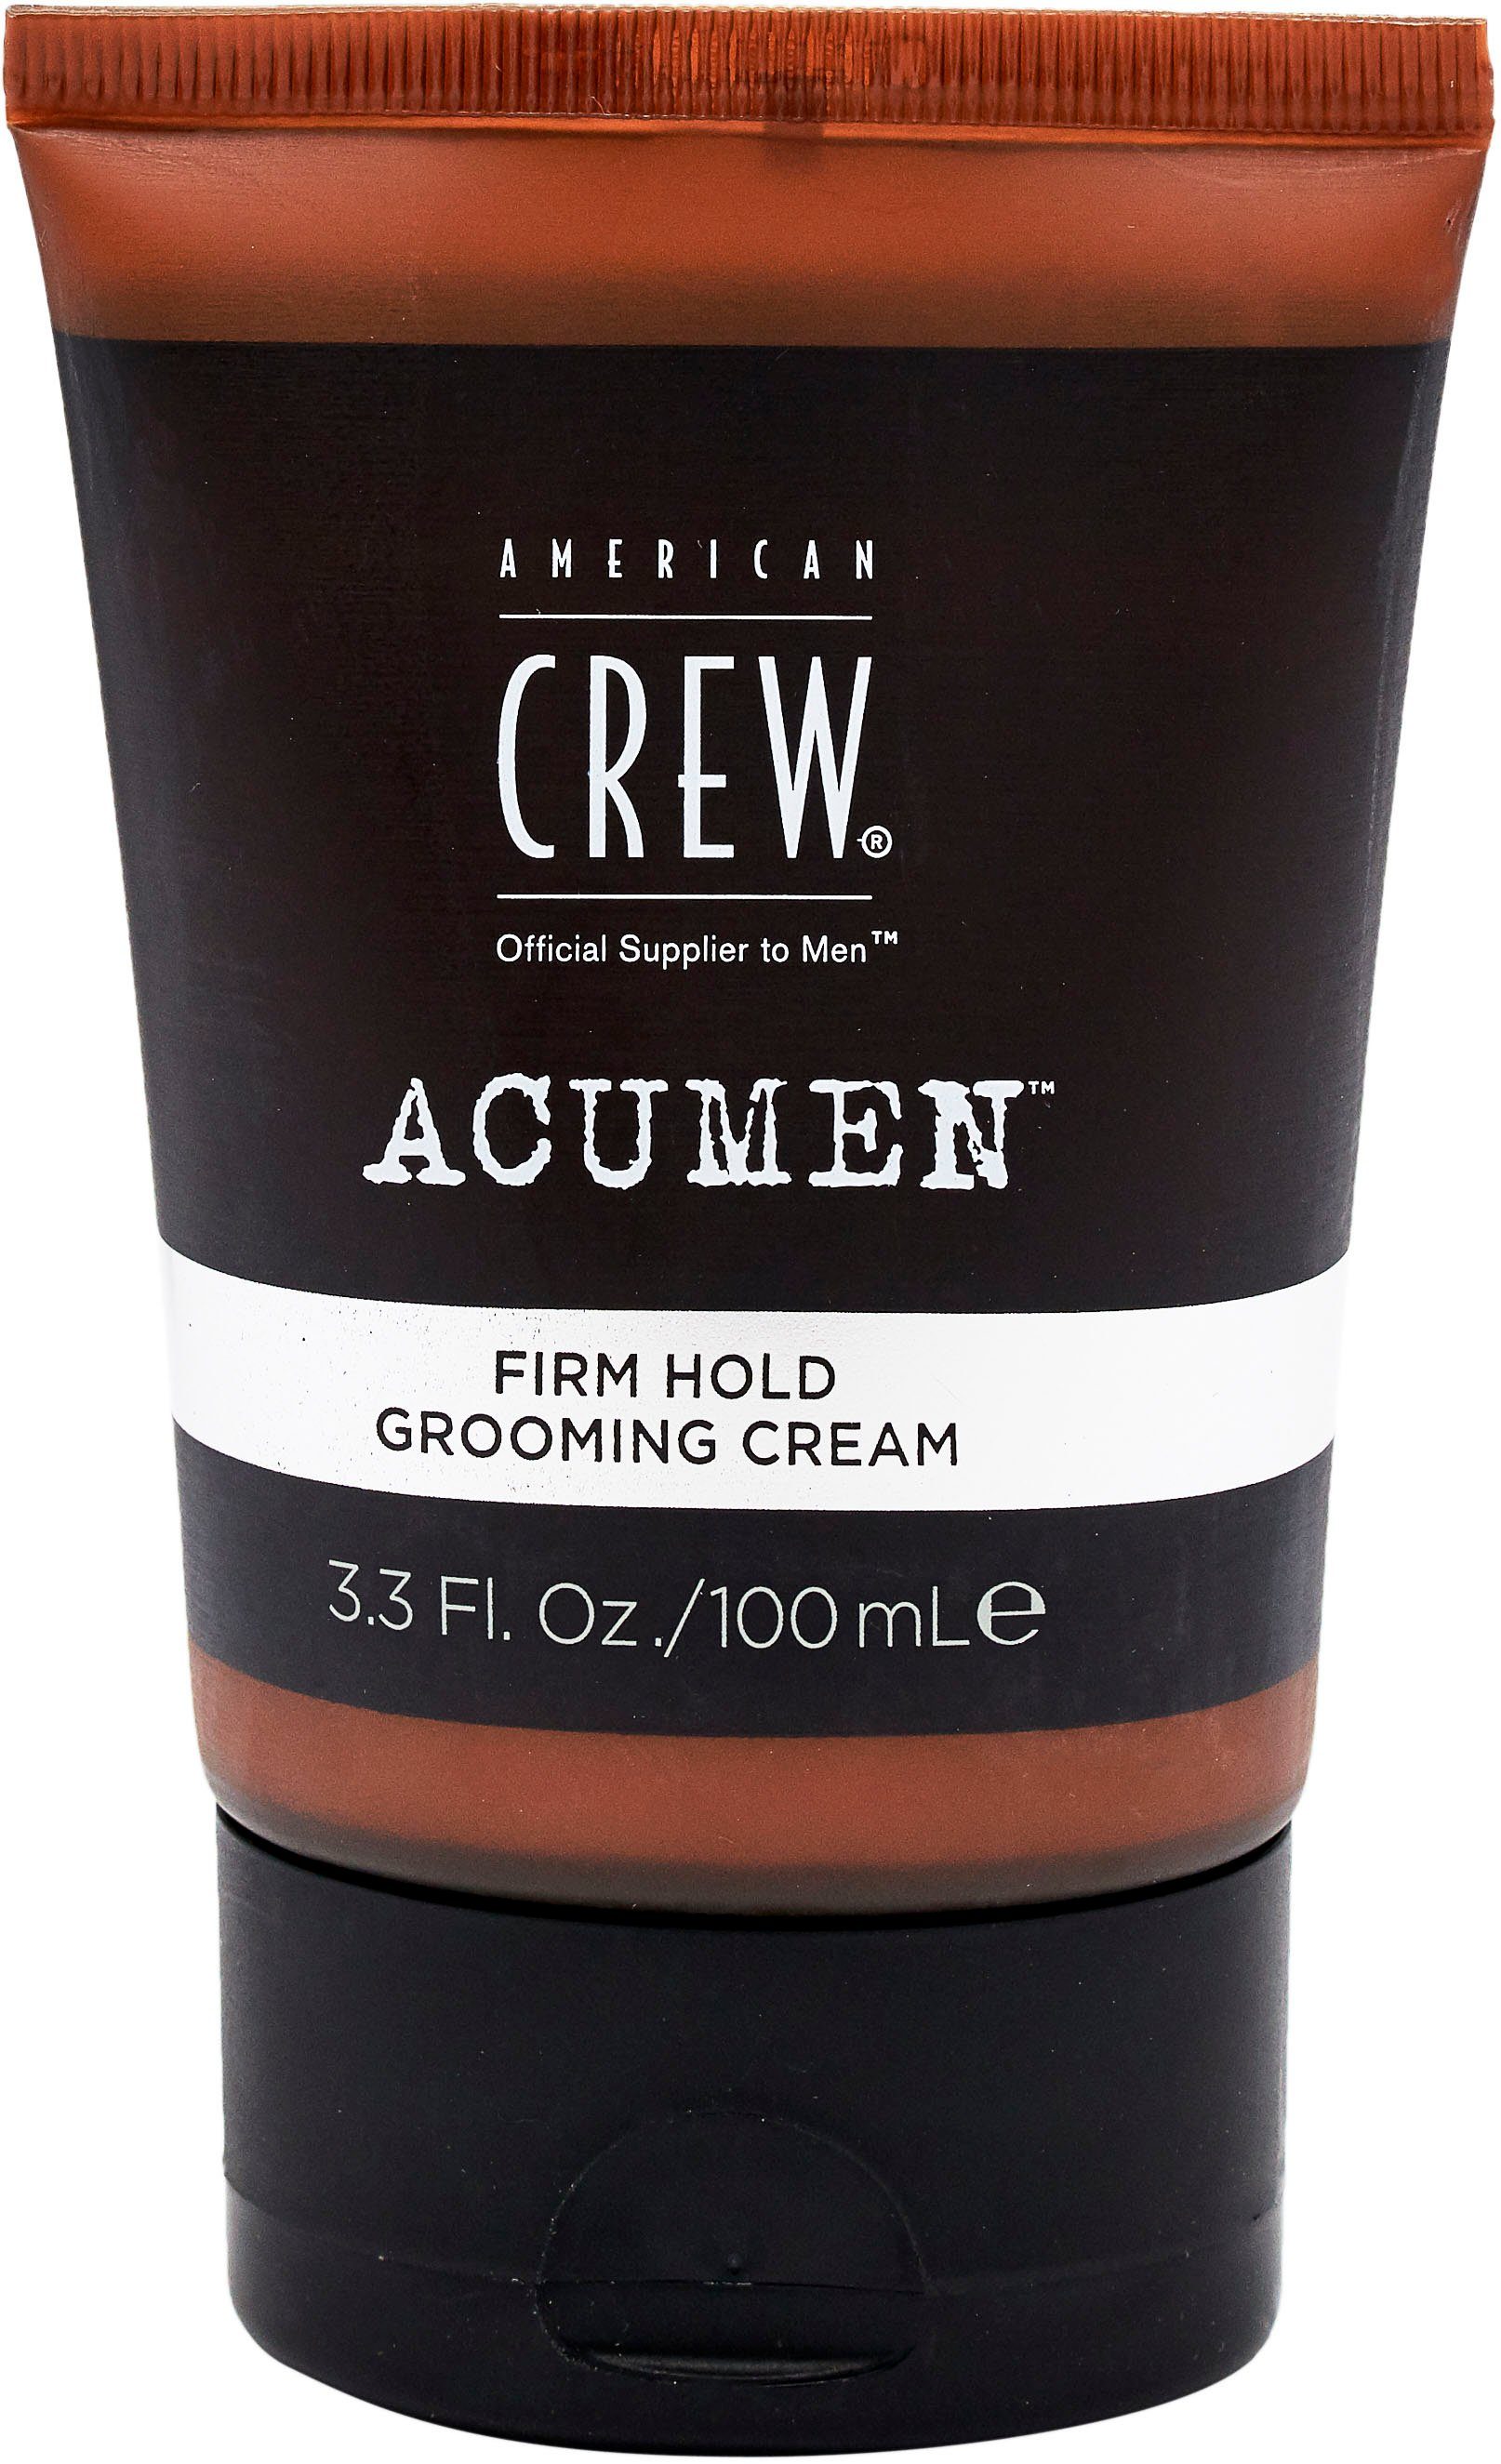 American Crew Styling-Creme Firm Hold Acumen Cream Grooming